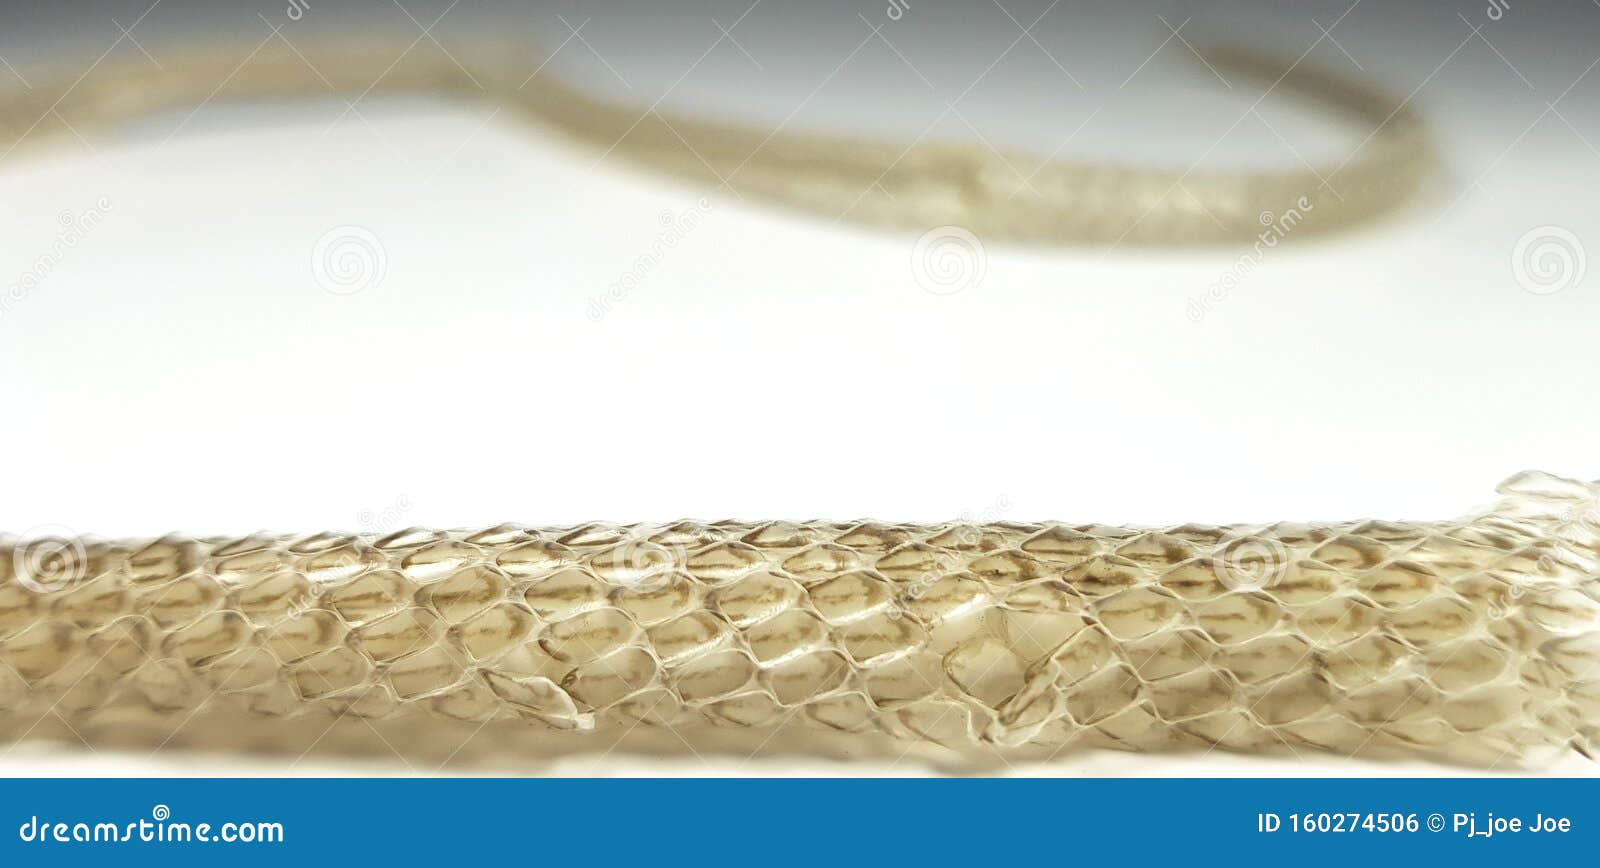 scaled skin of snake on white background, macro photo. reptile scale pattern. shedded dry snake skin closeup. molting snake.